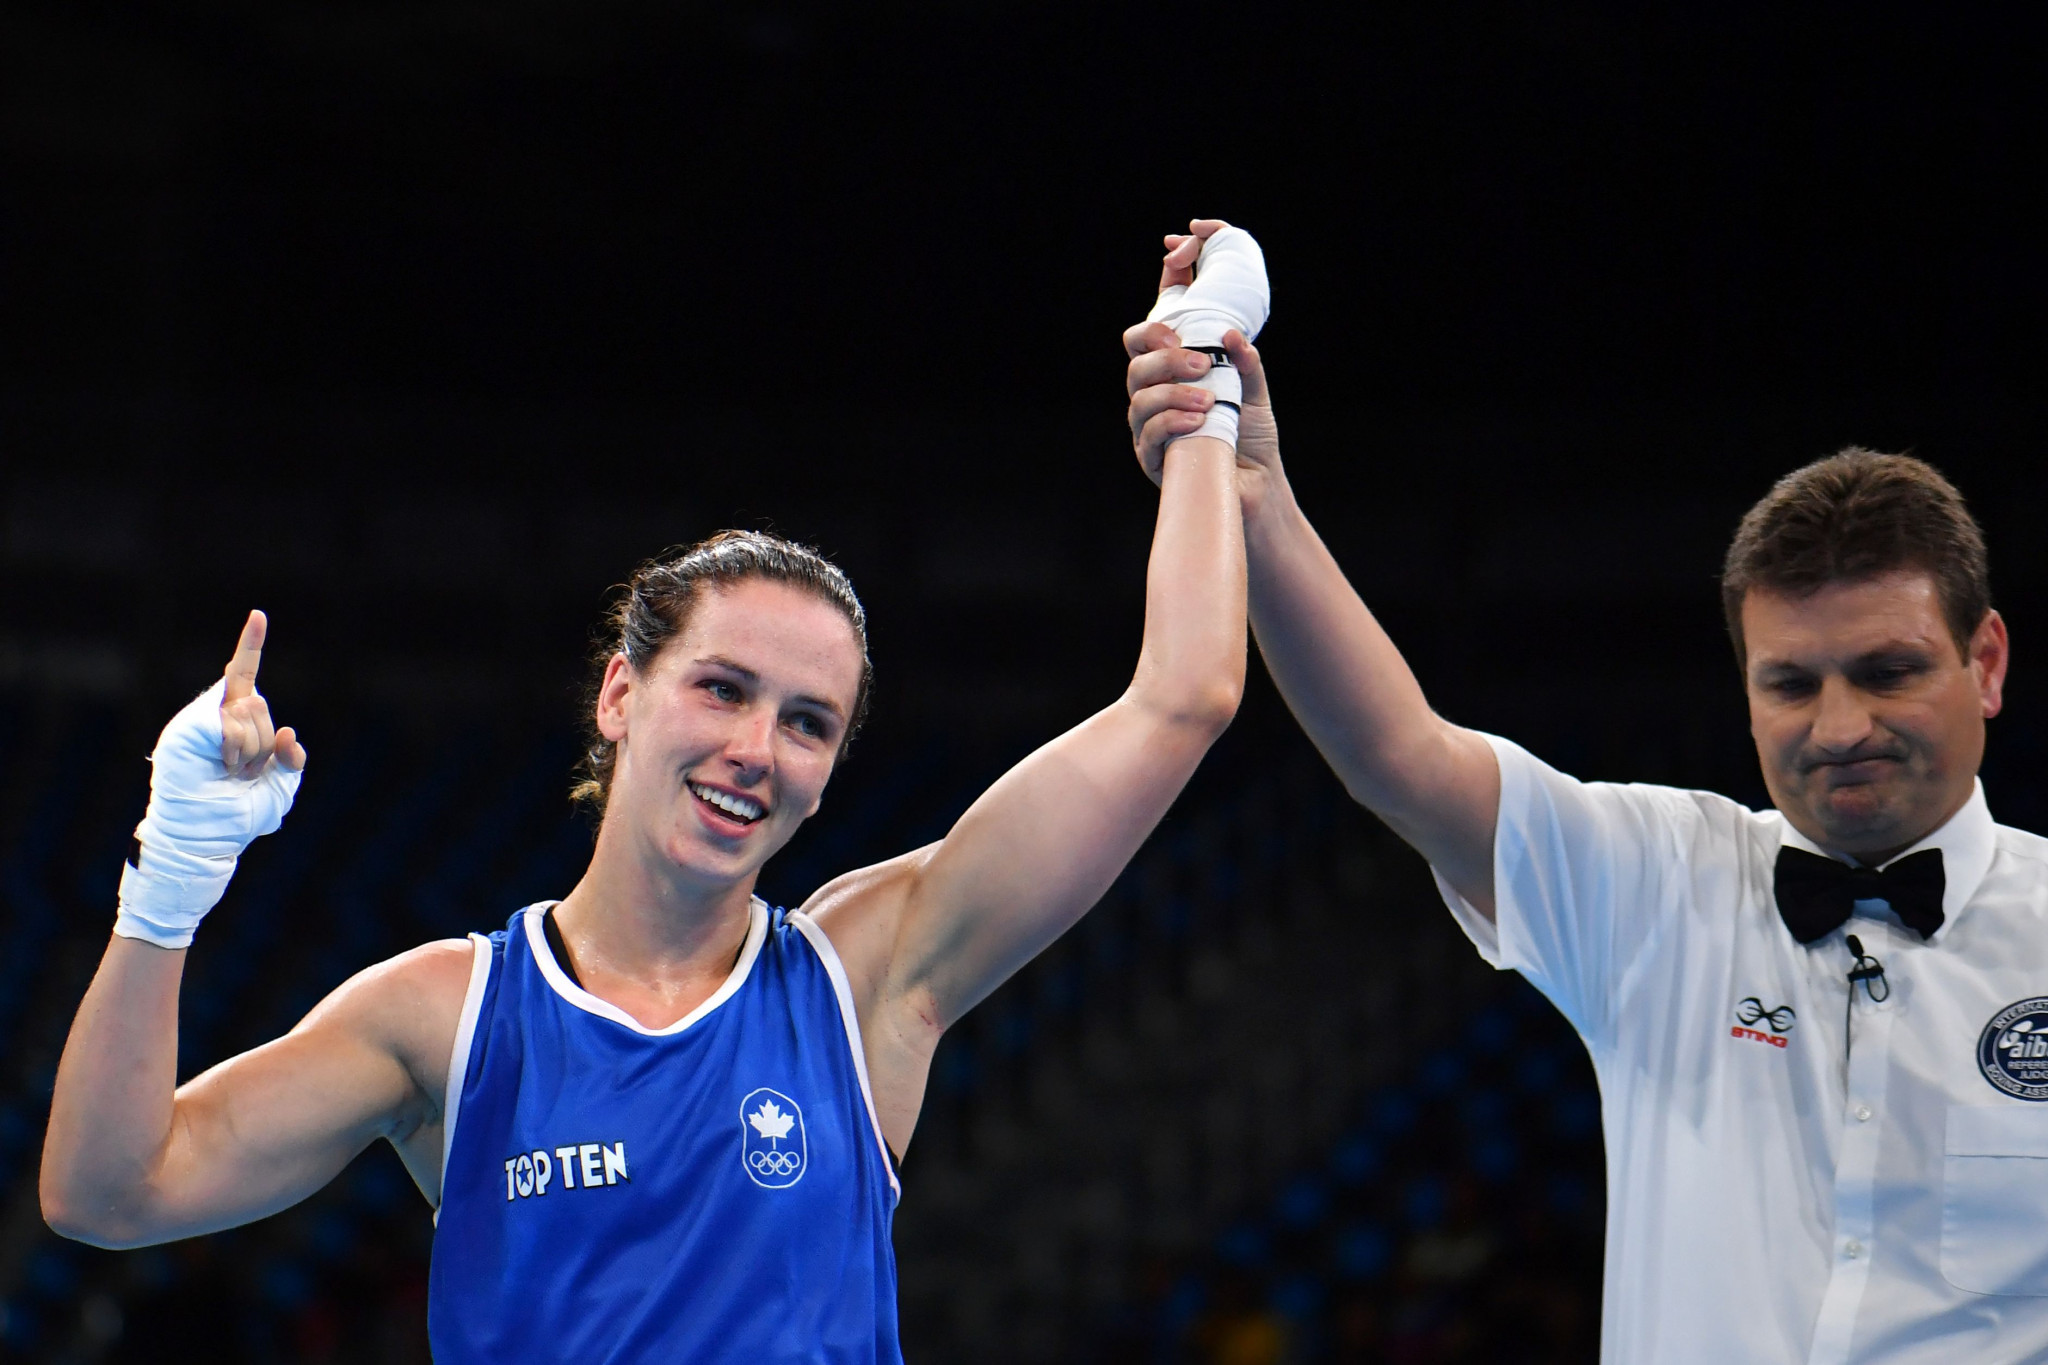 Canadian boxer Mandy Bujold is challenging an IOC decision after missing out on a Tokyo 2020 berth ©Getty Images